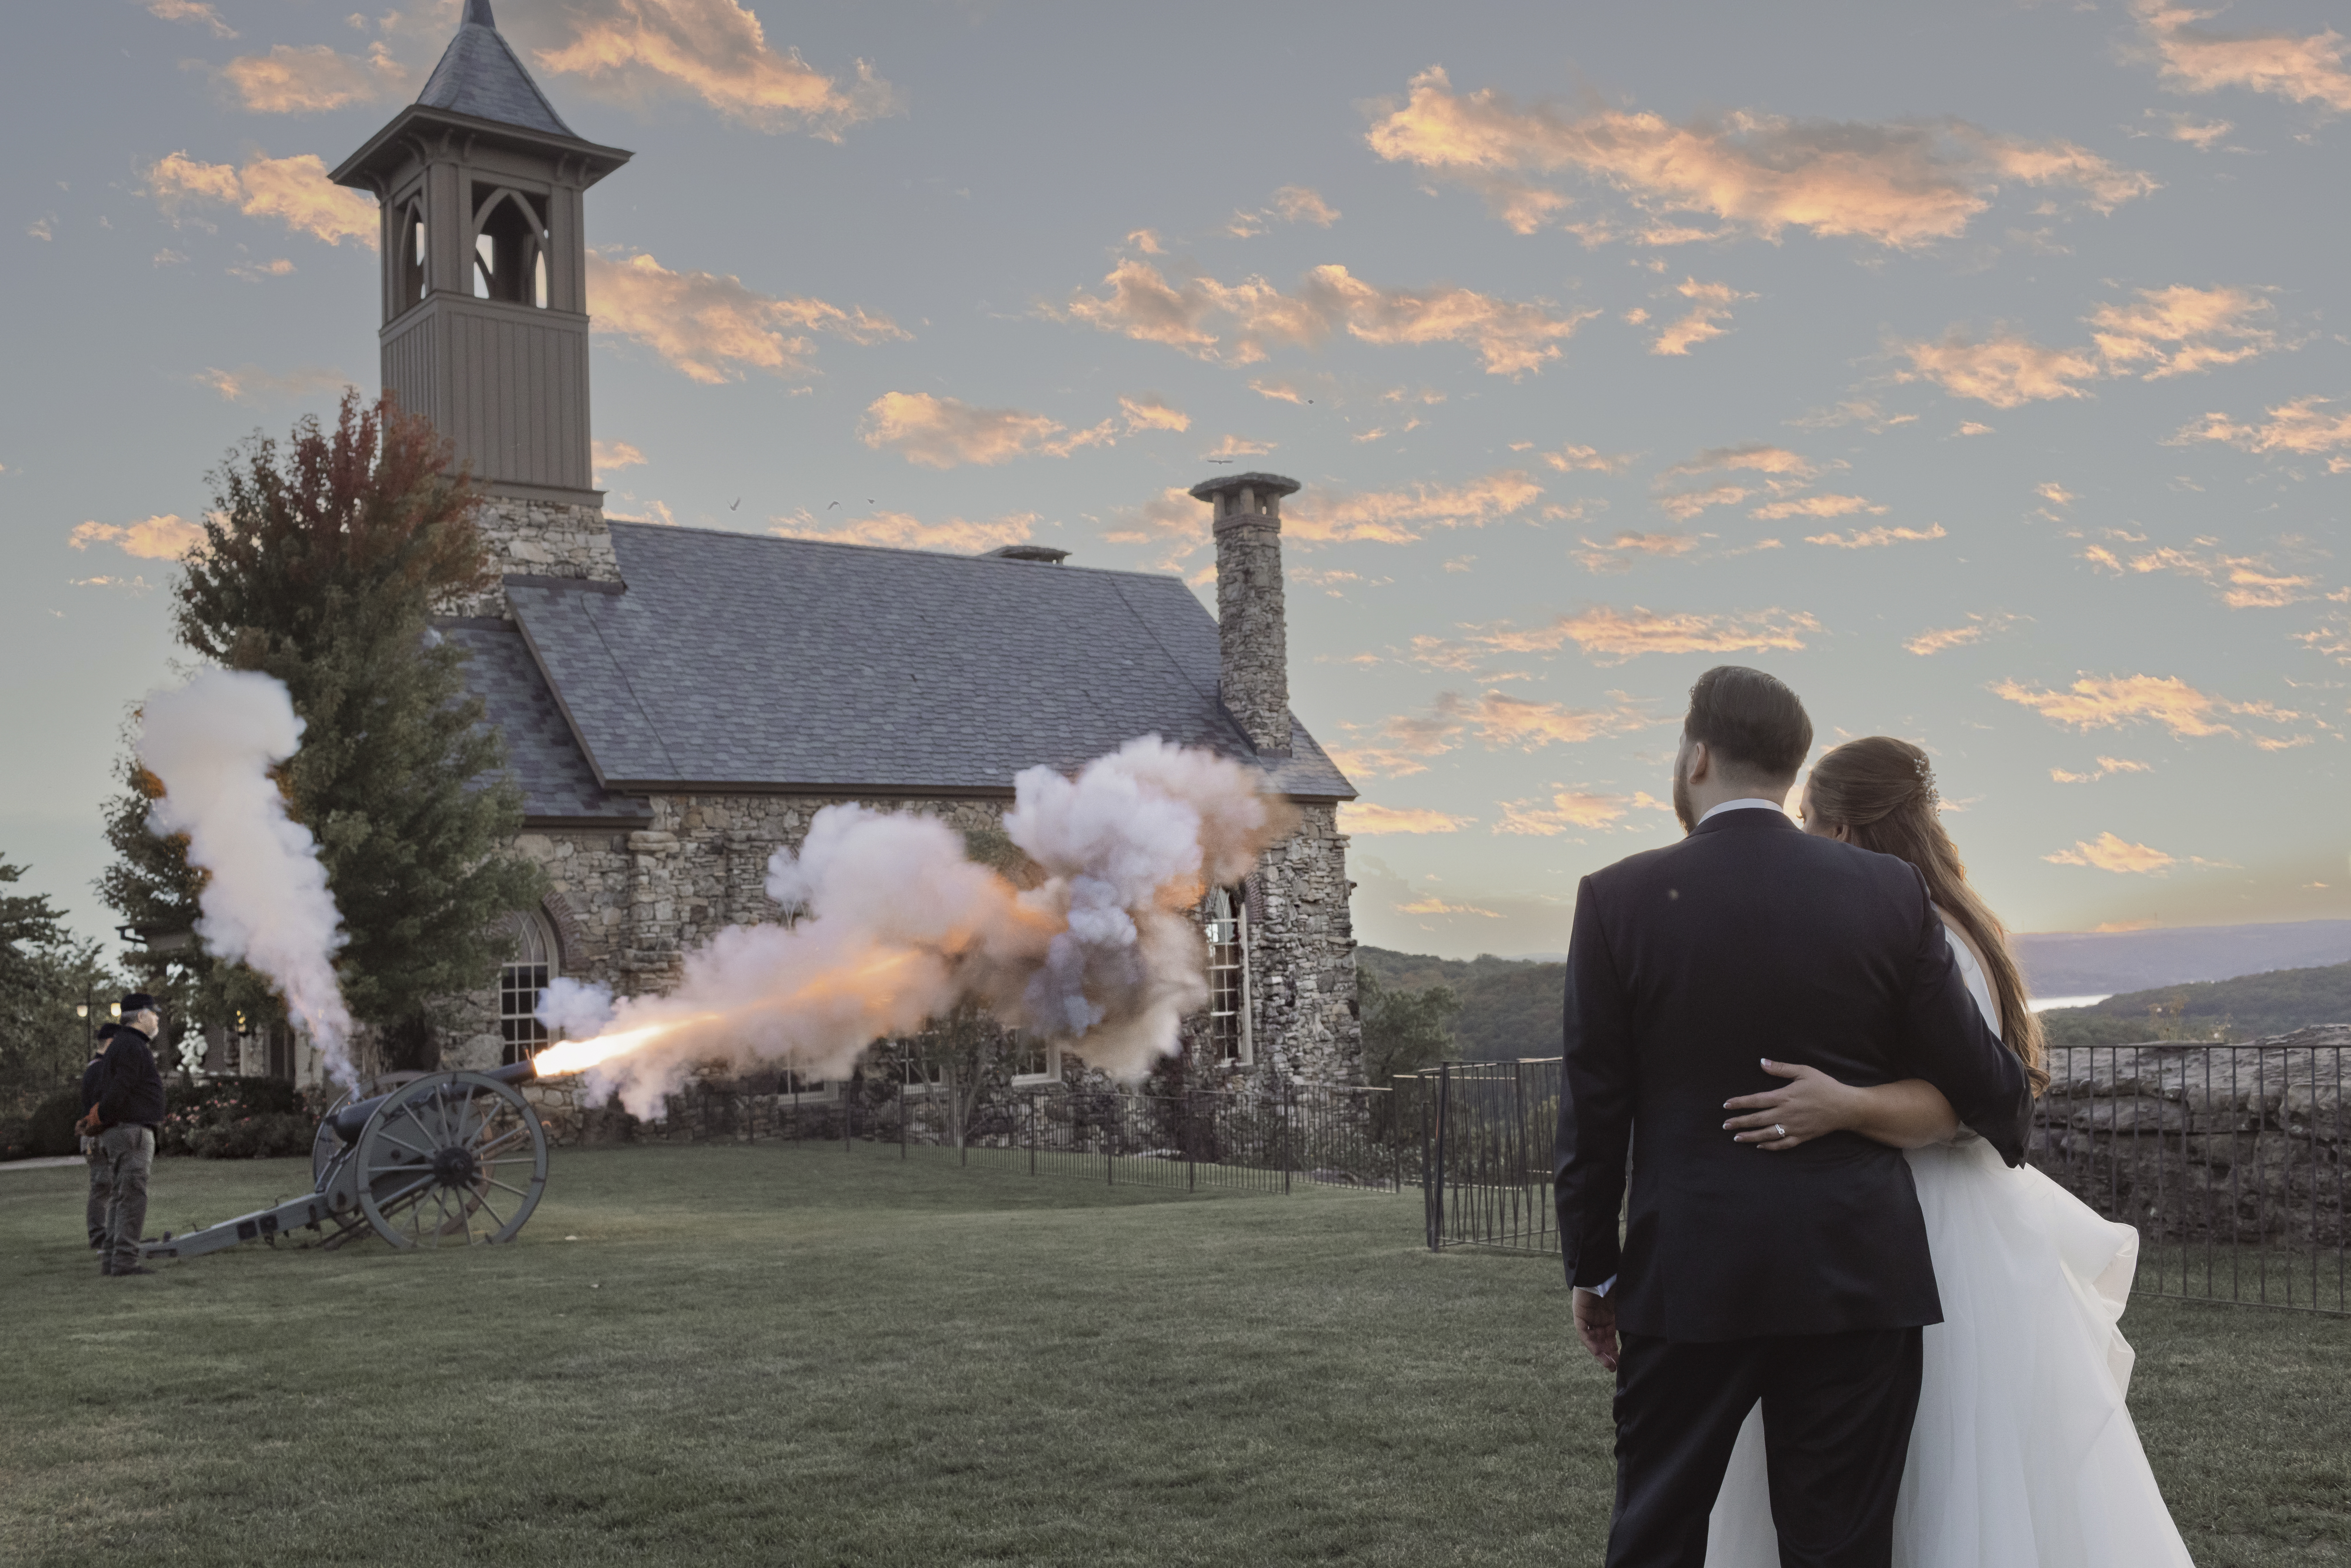 Luxury wedding photographer gets perfect shot of canon going off at a wedding at Top of the Rock at Big Cedar Lodge in Ridgedale Missouri near Branson.